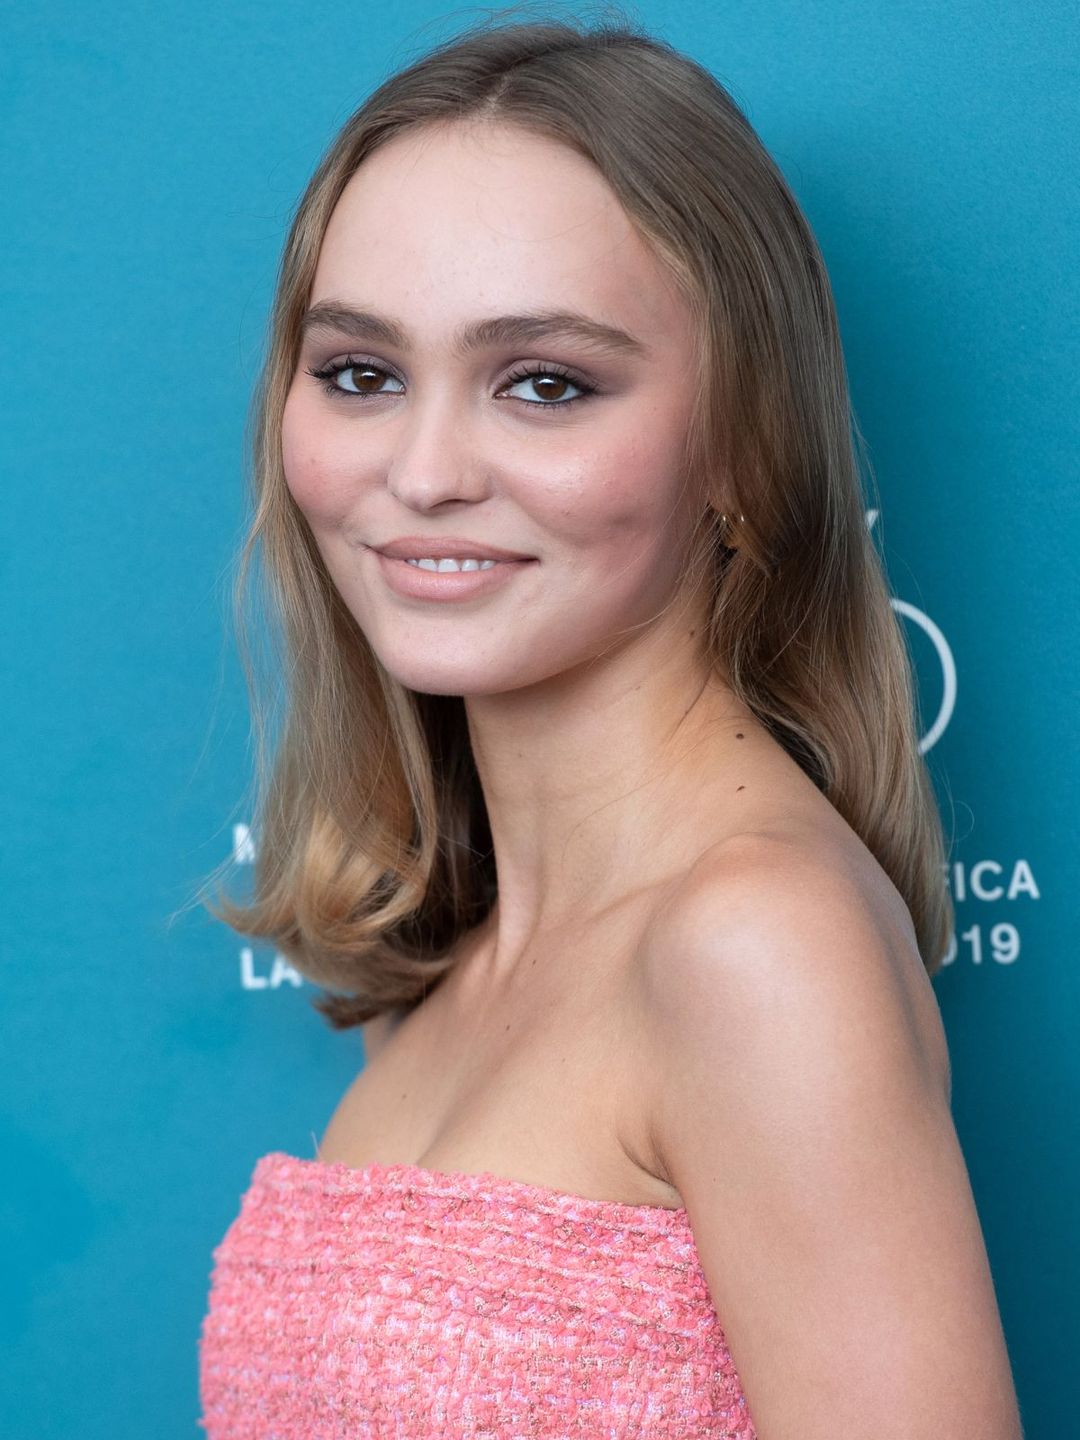 Lily-Rose Melody Depp dating history